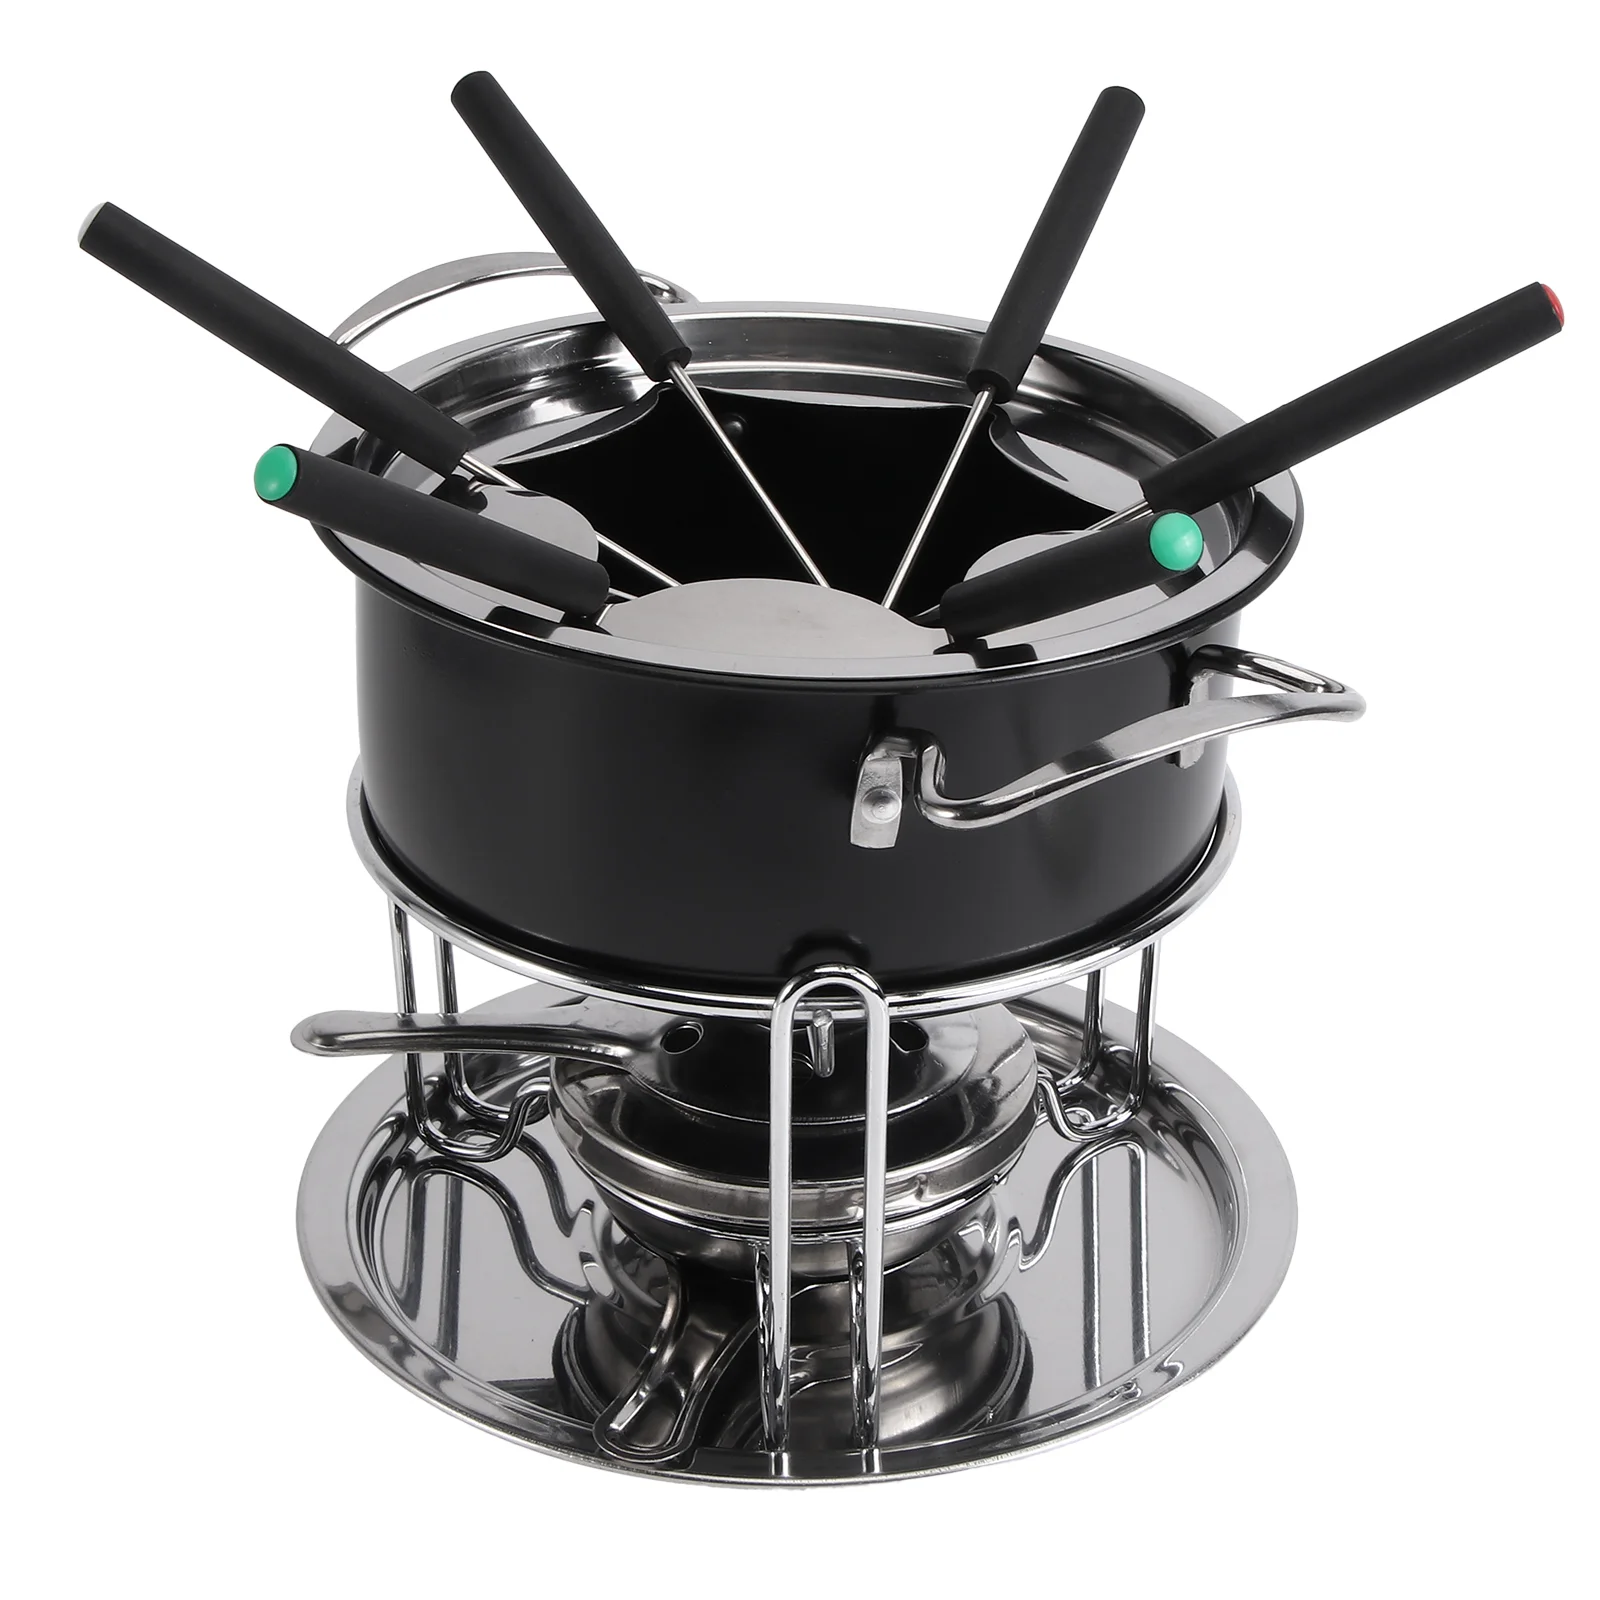 

Fondue Pot Chocolate Melting Cheese Butter Set Warmer Stainless Boiler Steel Pan Persons Double Choco Heating Forwarming